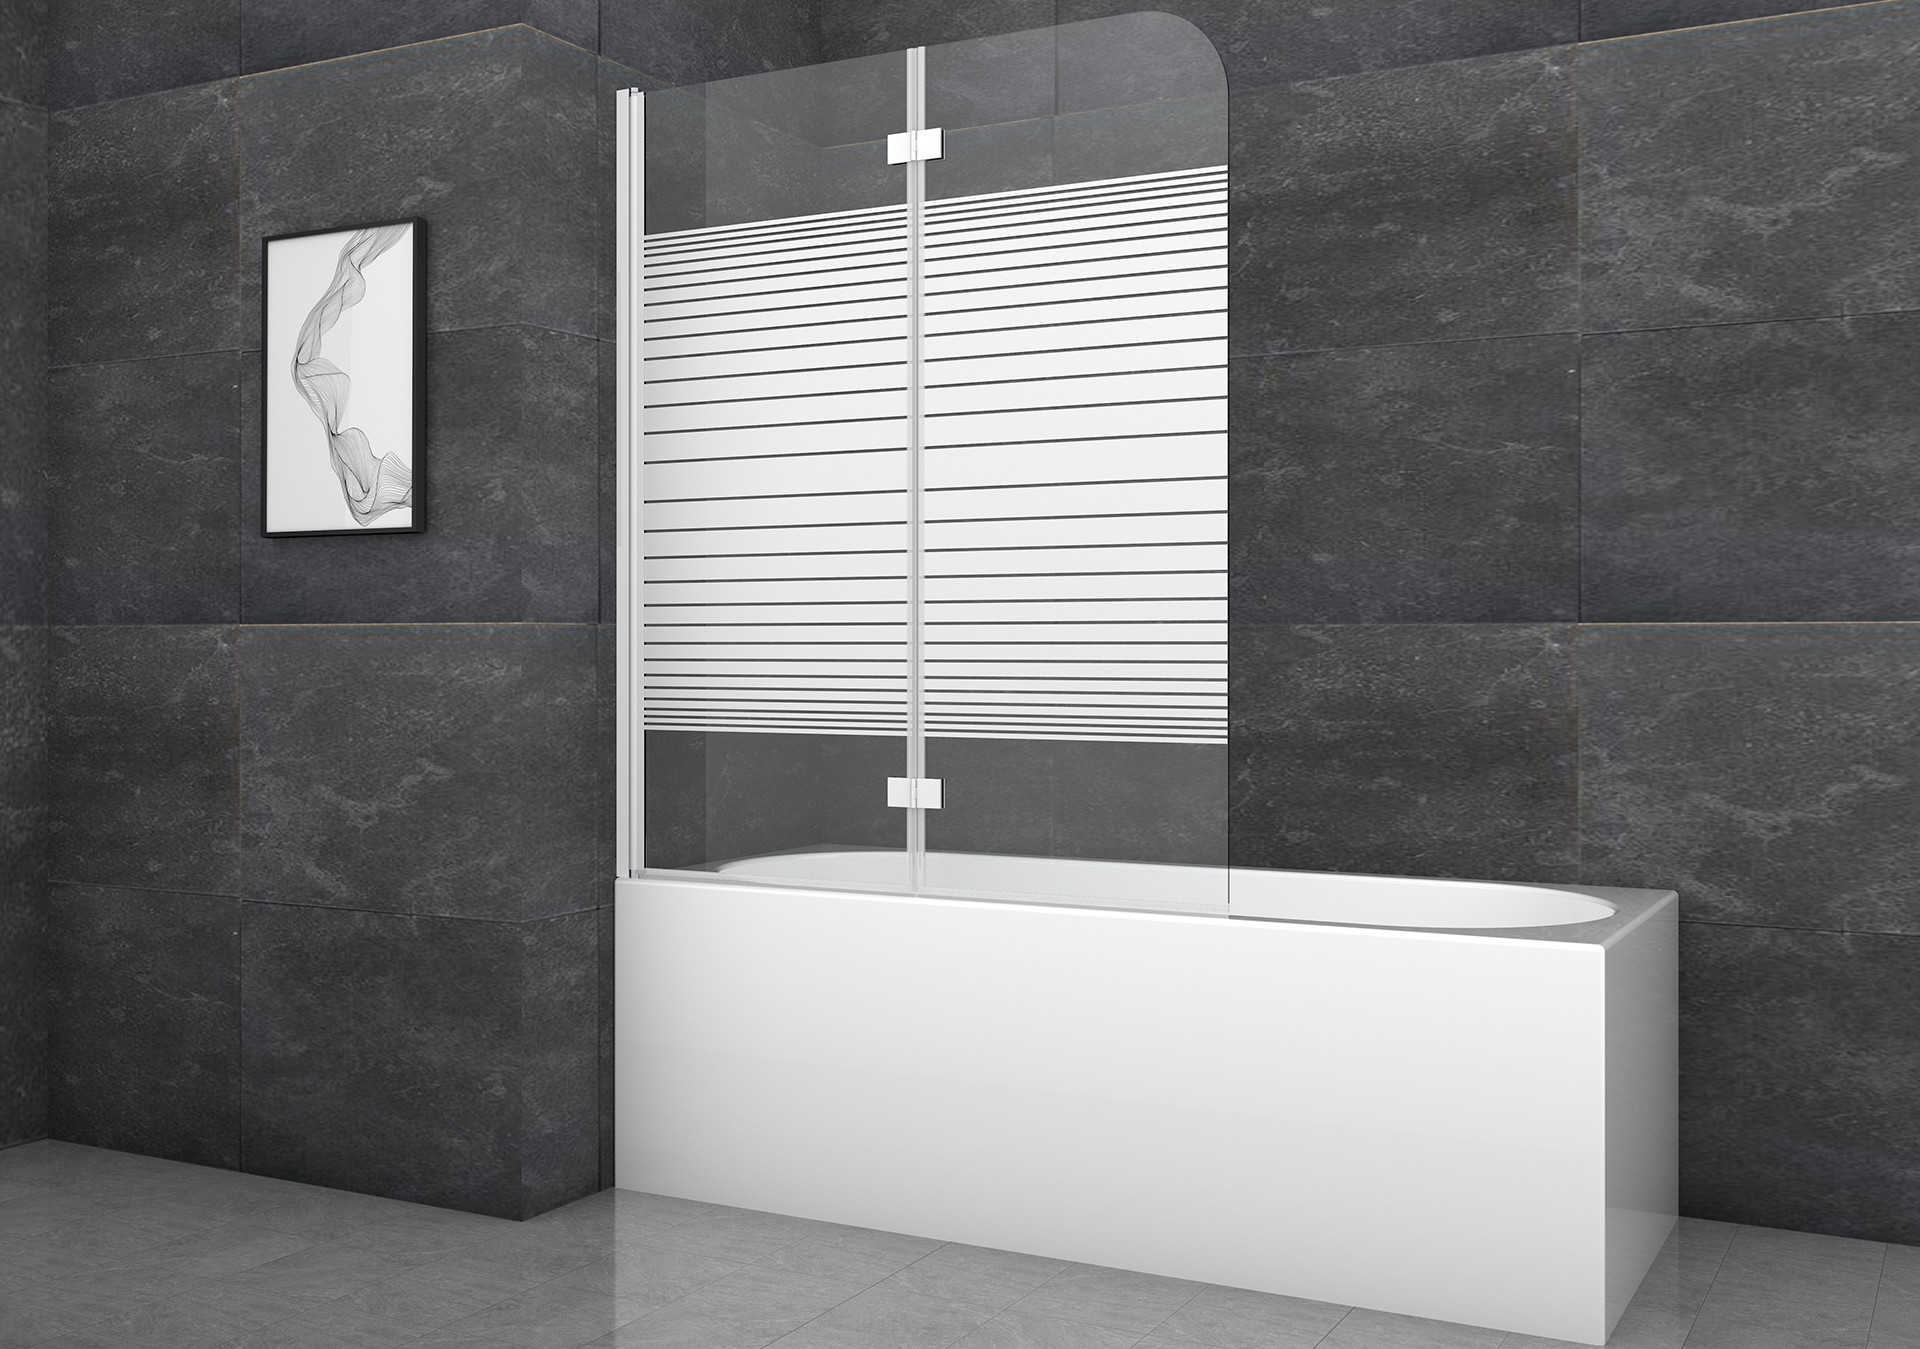 Shower Stalls are prefabricated units that include walls and floors